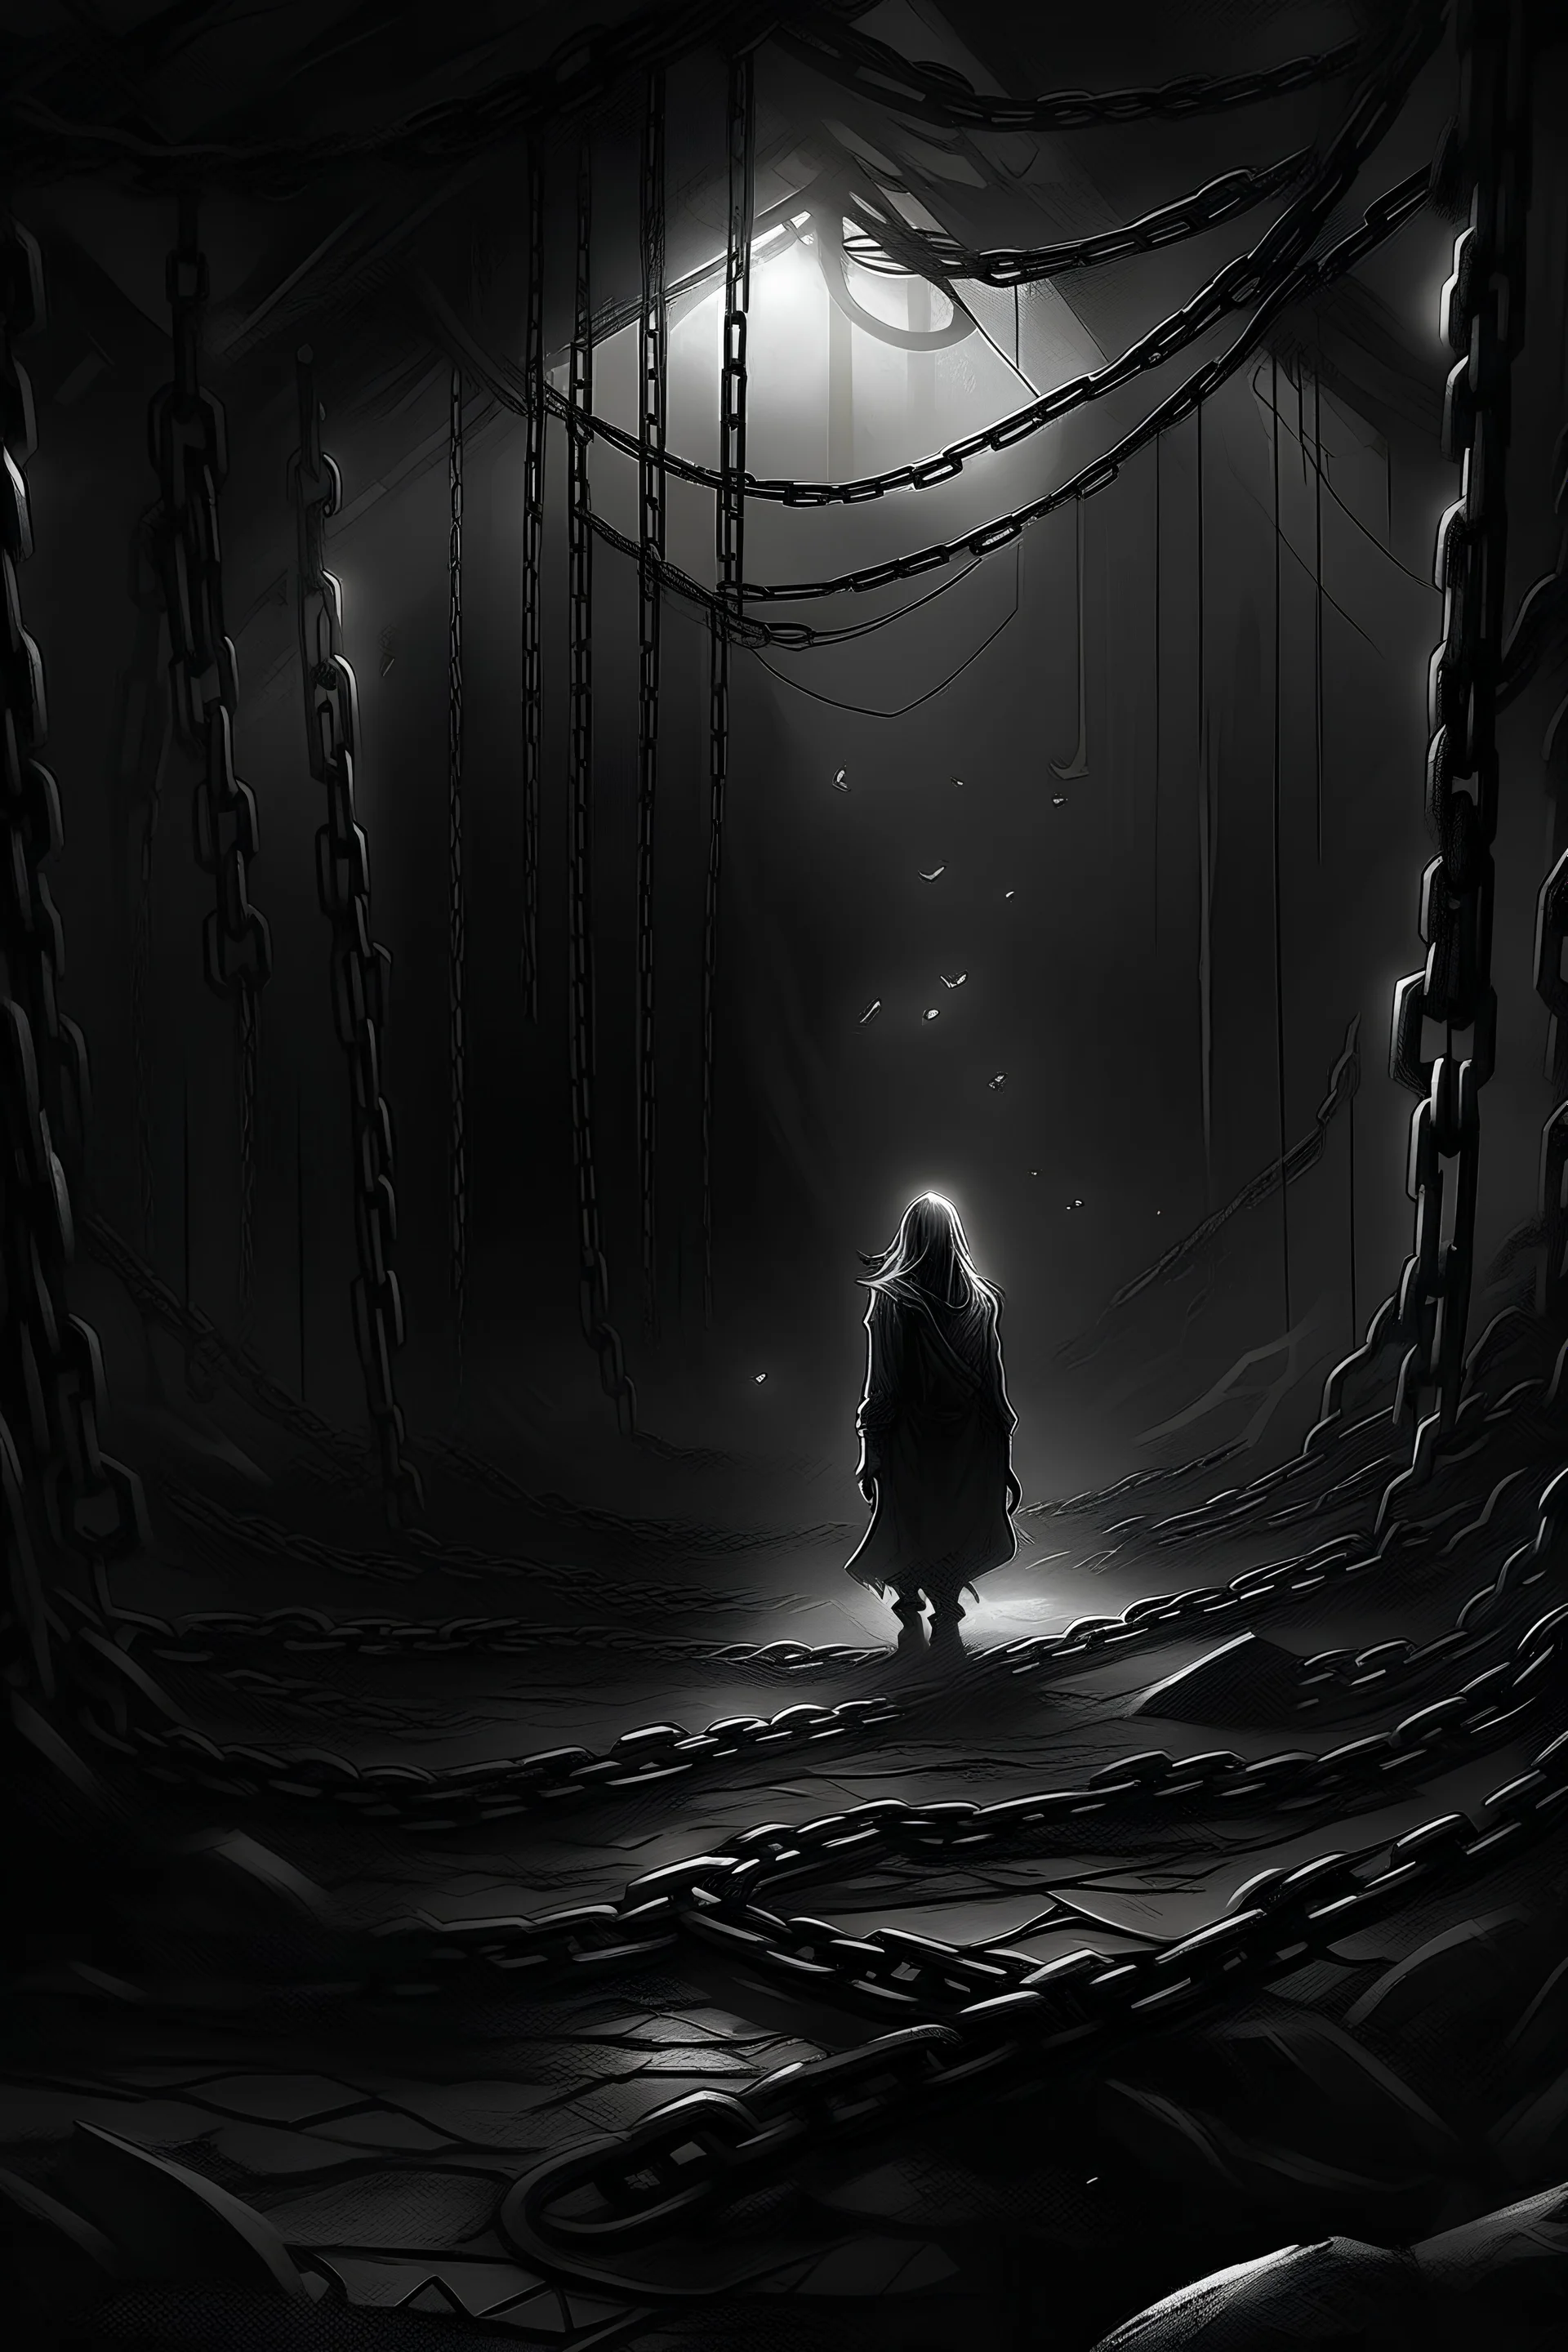 "Illustrate the harrowing journey of victims through a dark, labyrinthine network of chains and shadows, with a glimmer of hope breaking through."